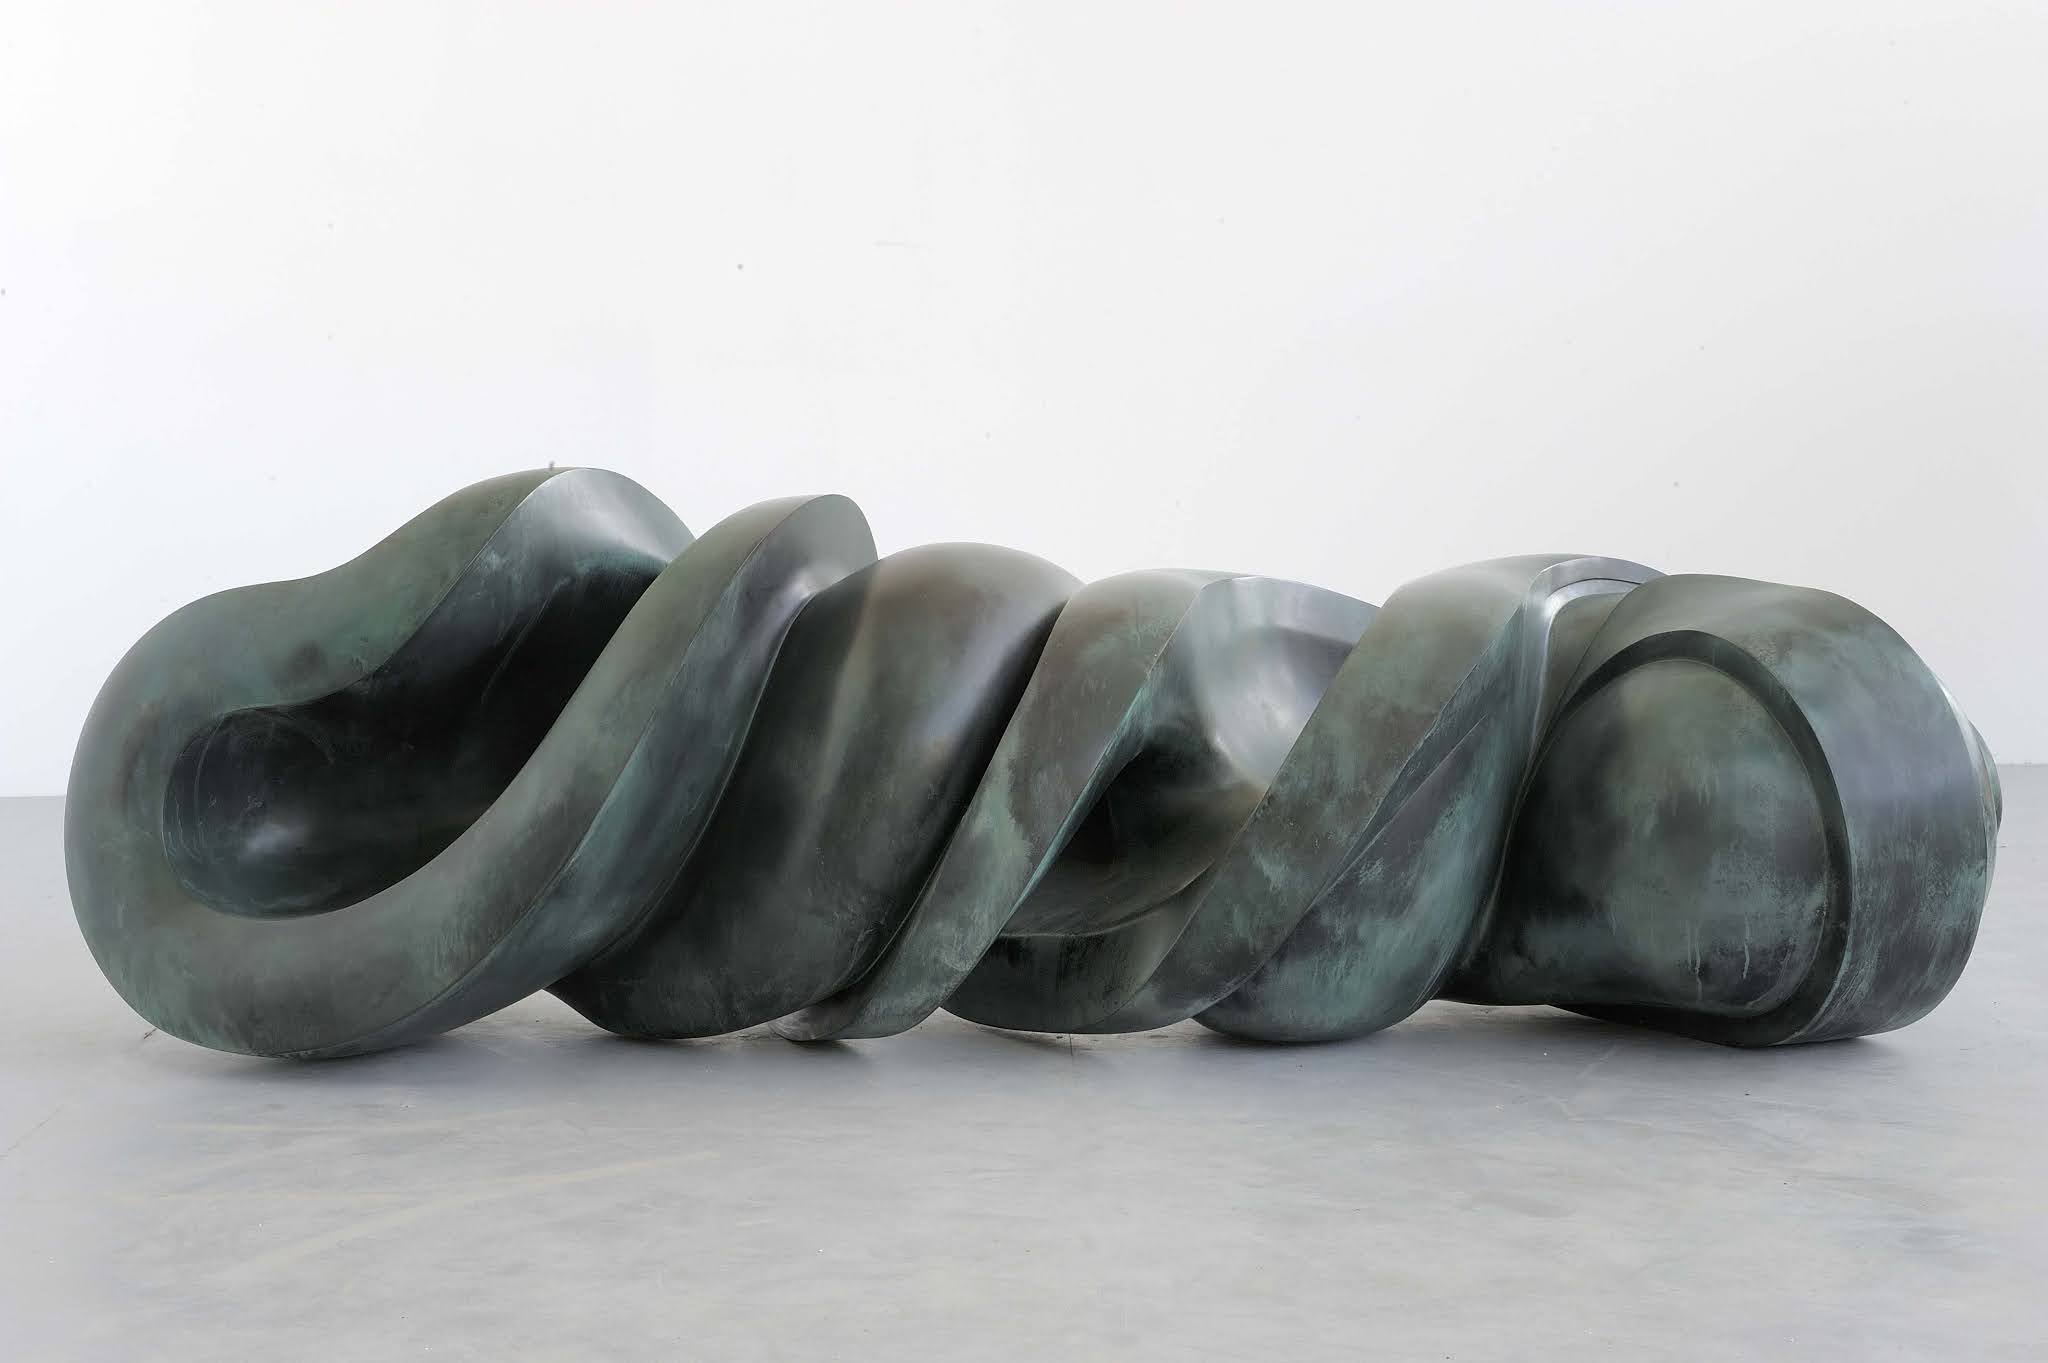 Works by Germany-based British sculptor Tony Cragg, born in Liverpool in 19...